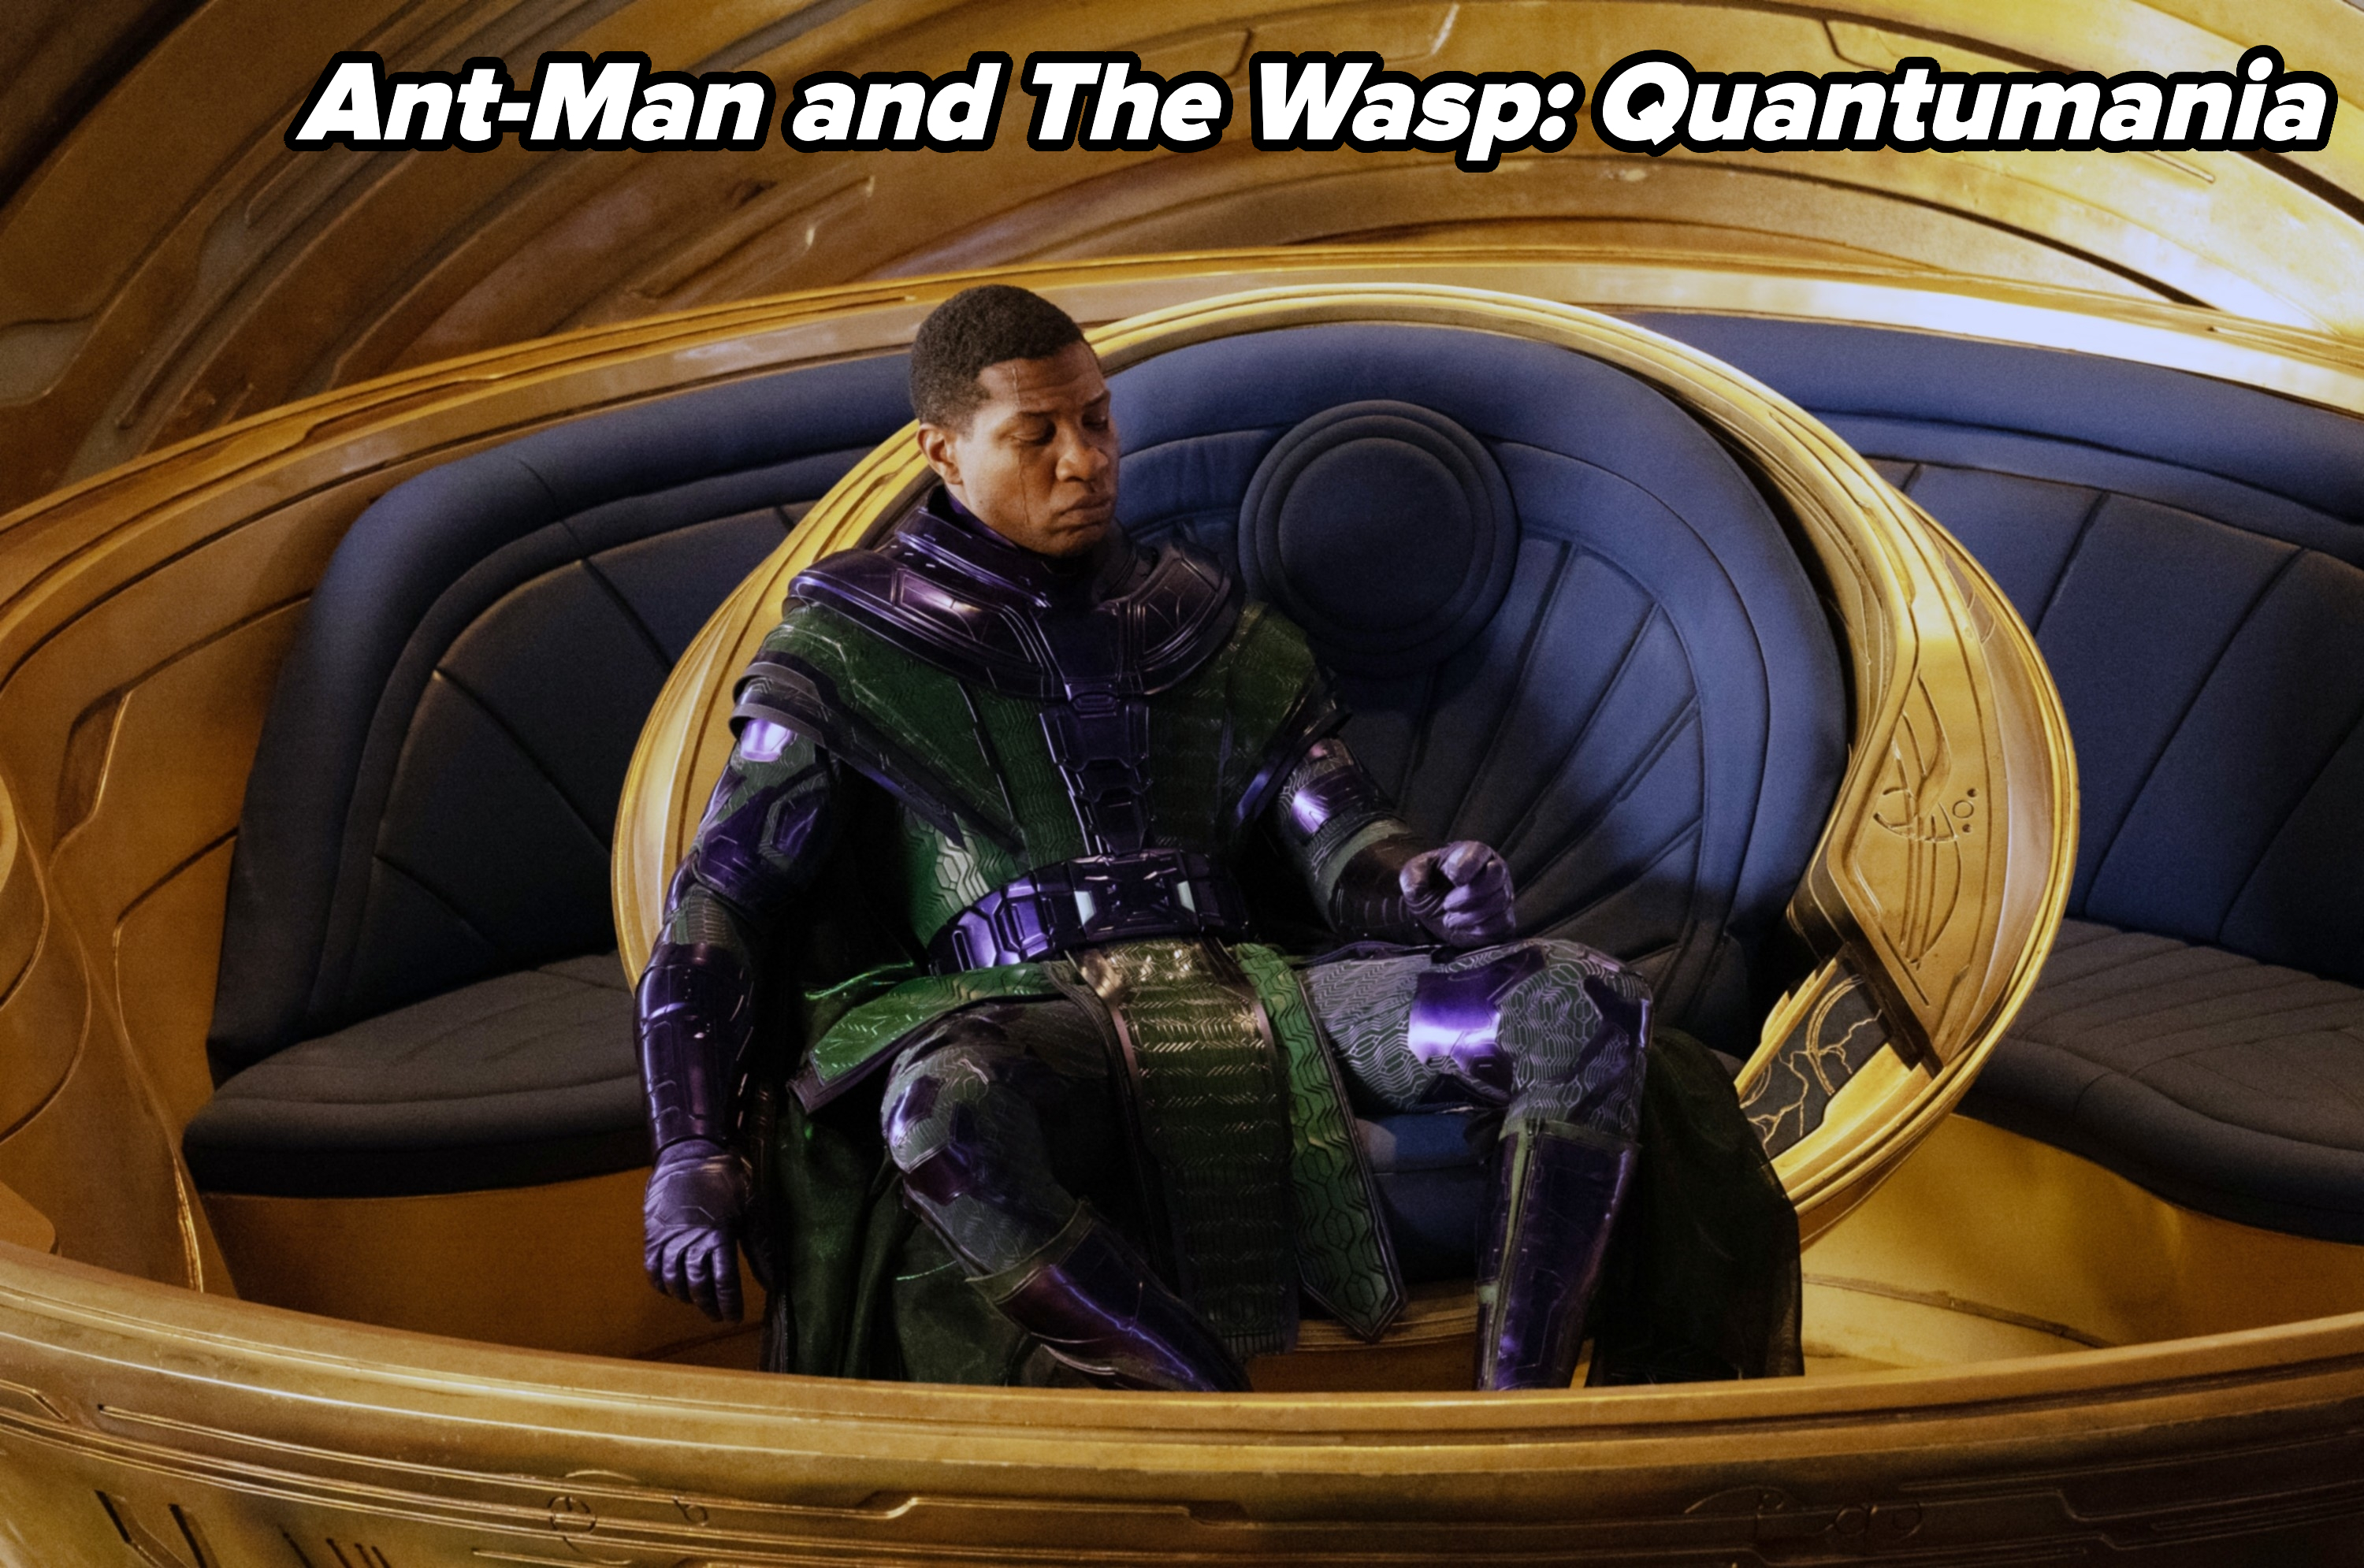 Screenshot from &quot;Ant-Man and the Wasp: Quantumania&quot;